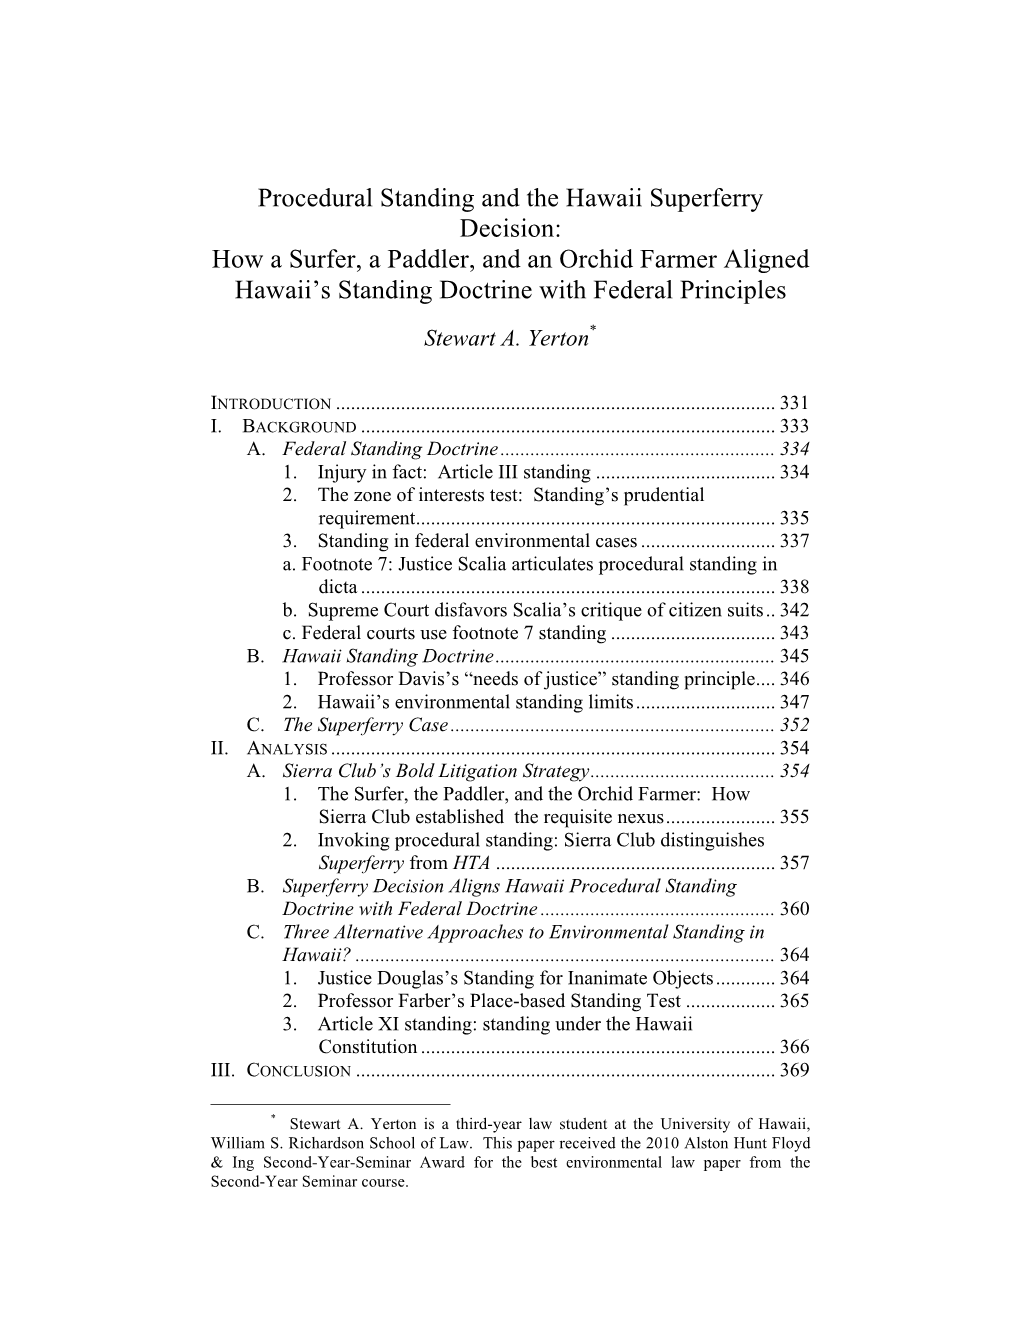 Procedural Standing and the Hawaii Superferry Decision: How a Surfer, a Paddler, and an Orchid Farmer Aligned Hawaii’S Standing Doctrine with Federal Principles